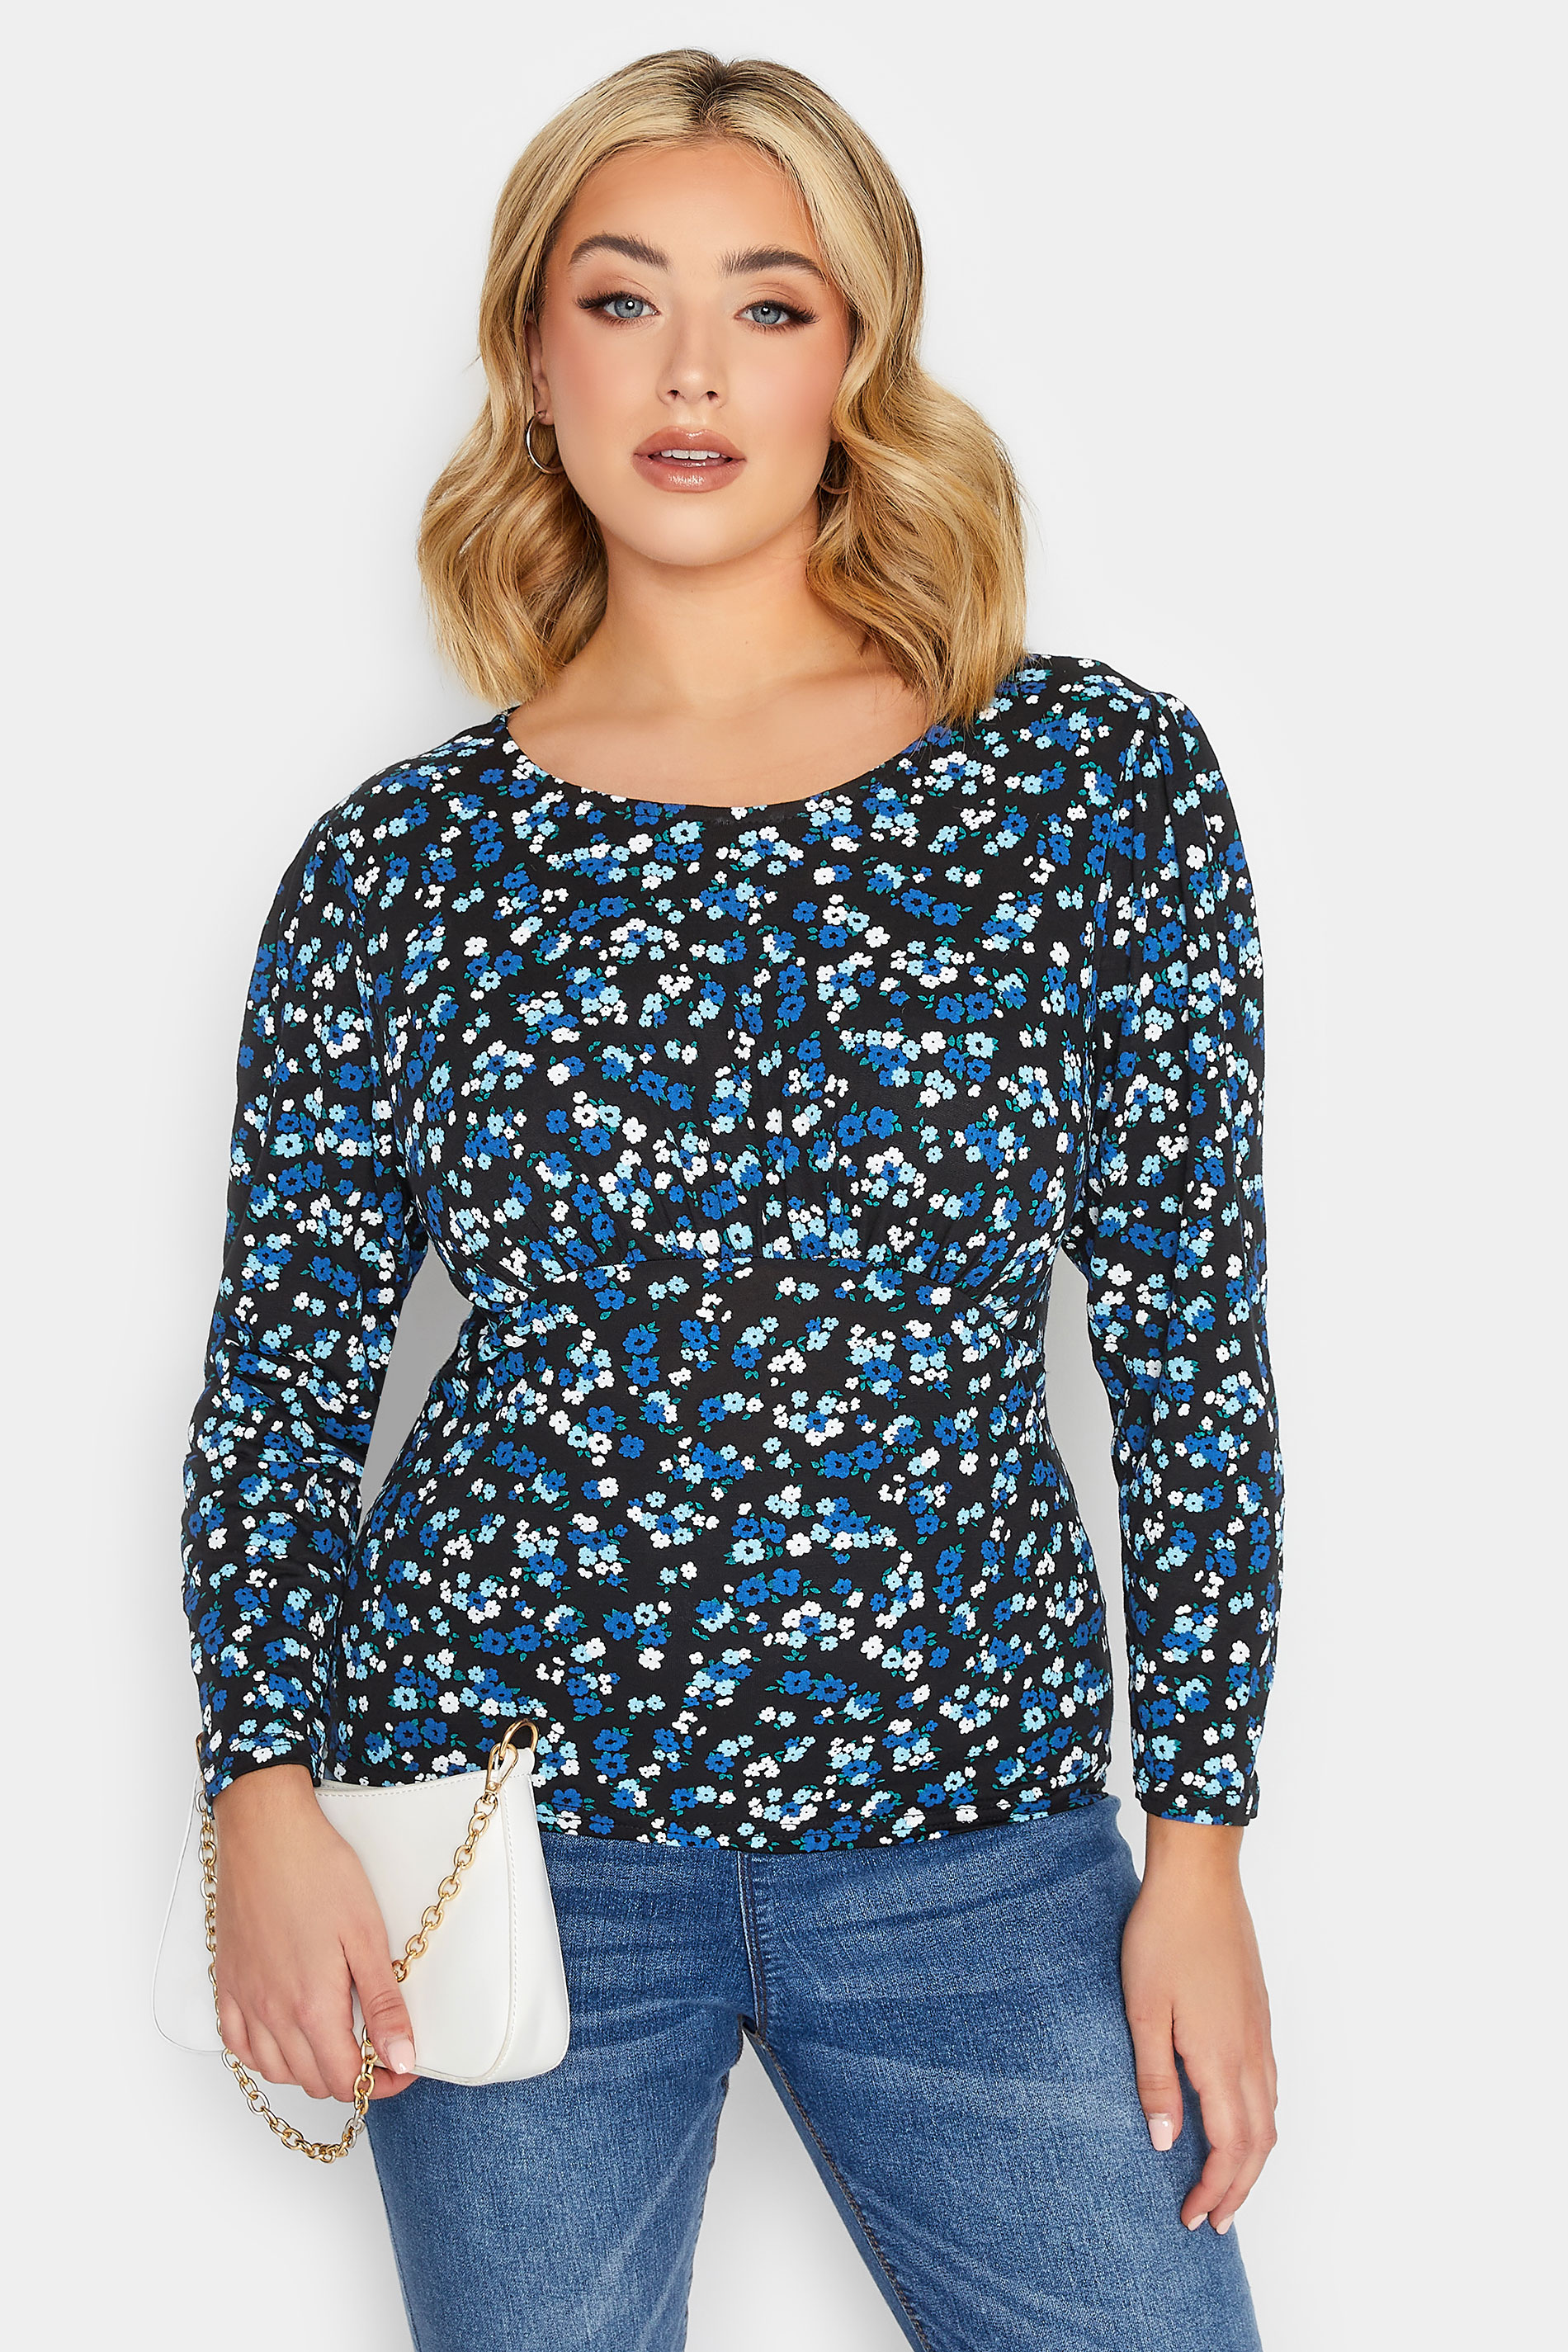 YOURS PETITE Curve Plus Size Black Ditsy Print Long Sleeve Top | Yours Clothing  1